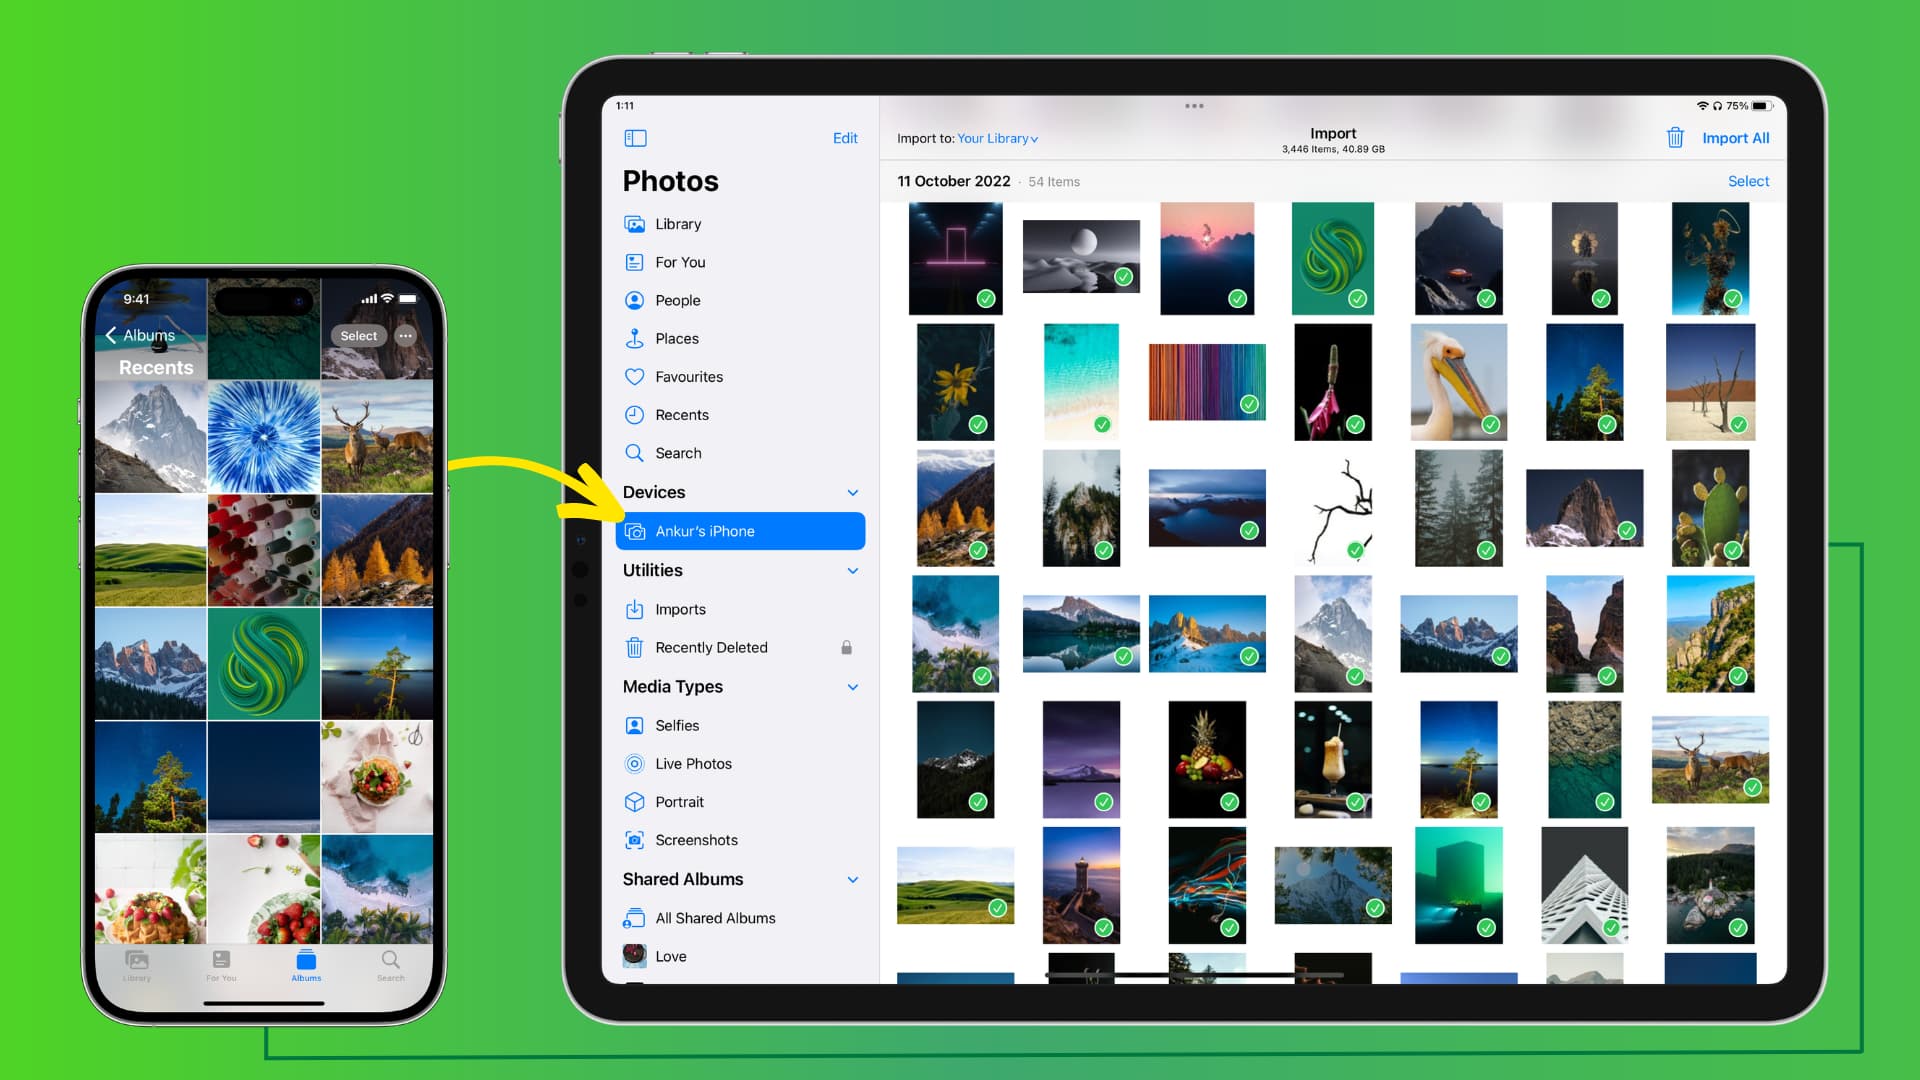 How to import photos and videos from iPhone to iPad using a USB cable